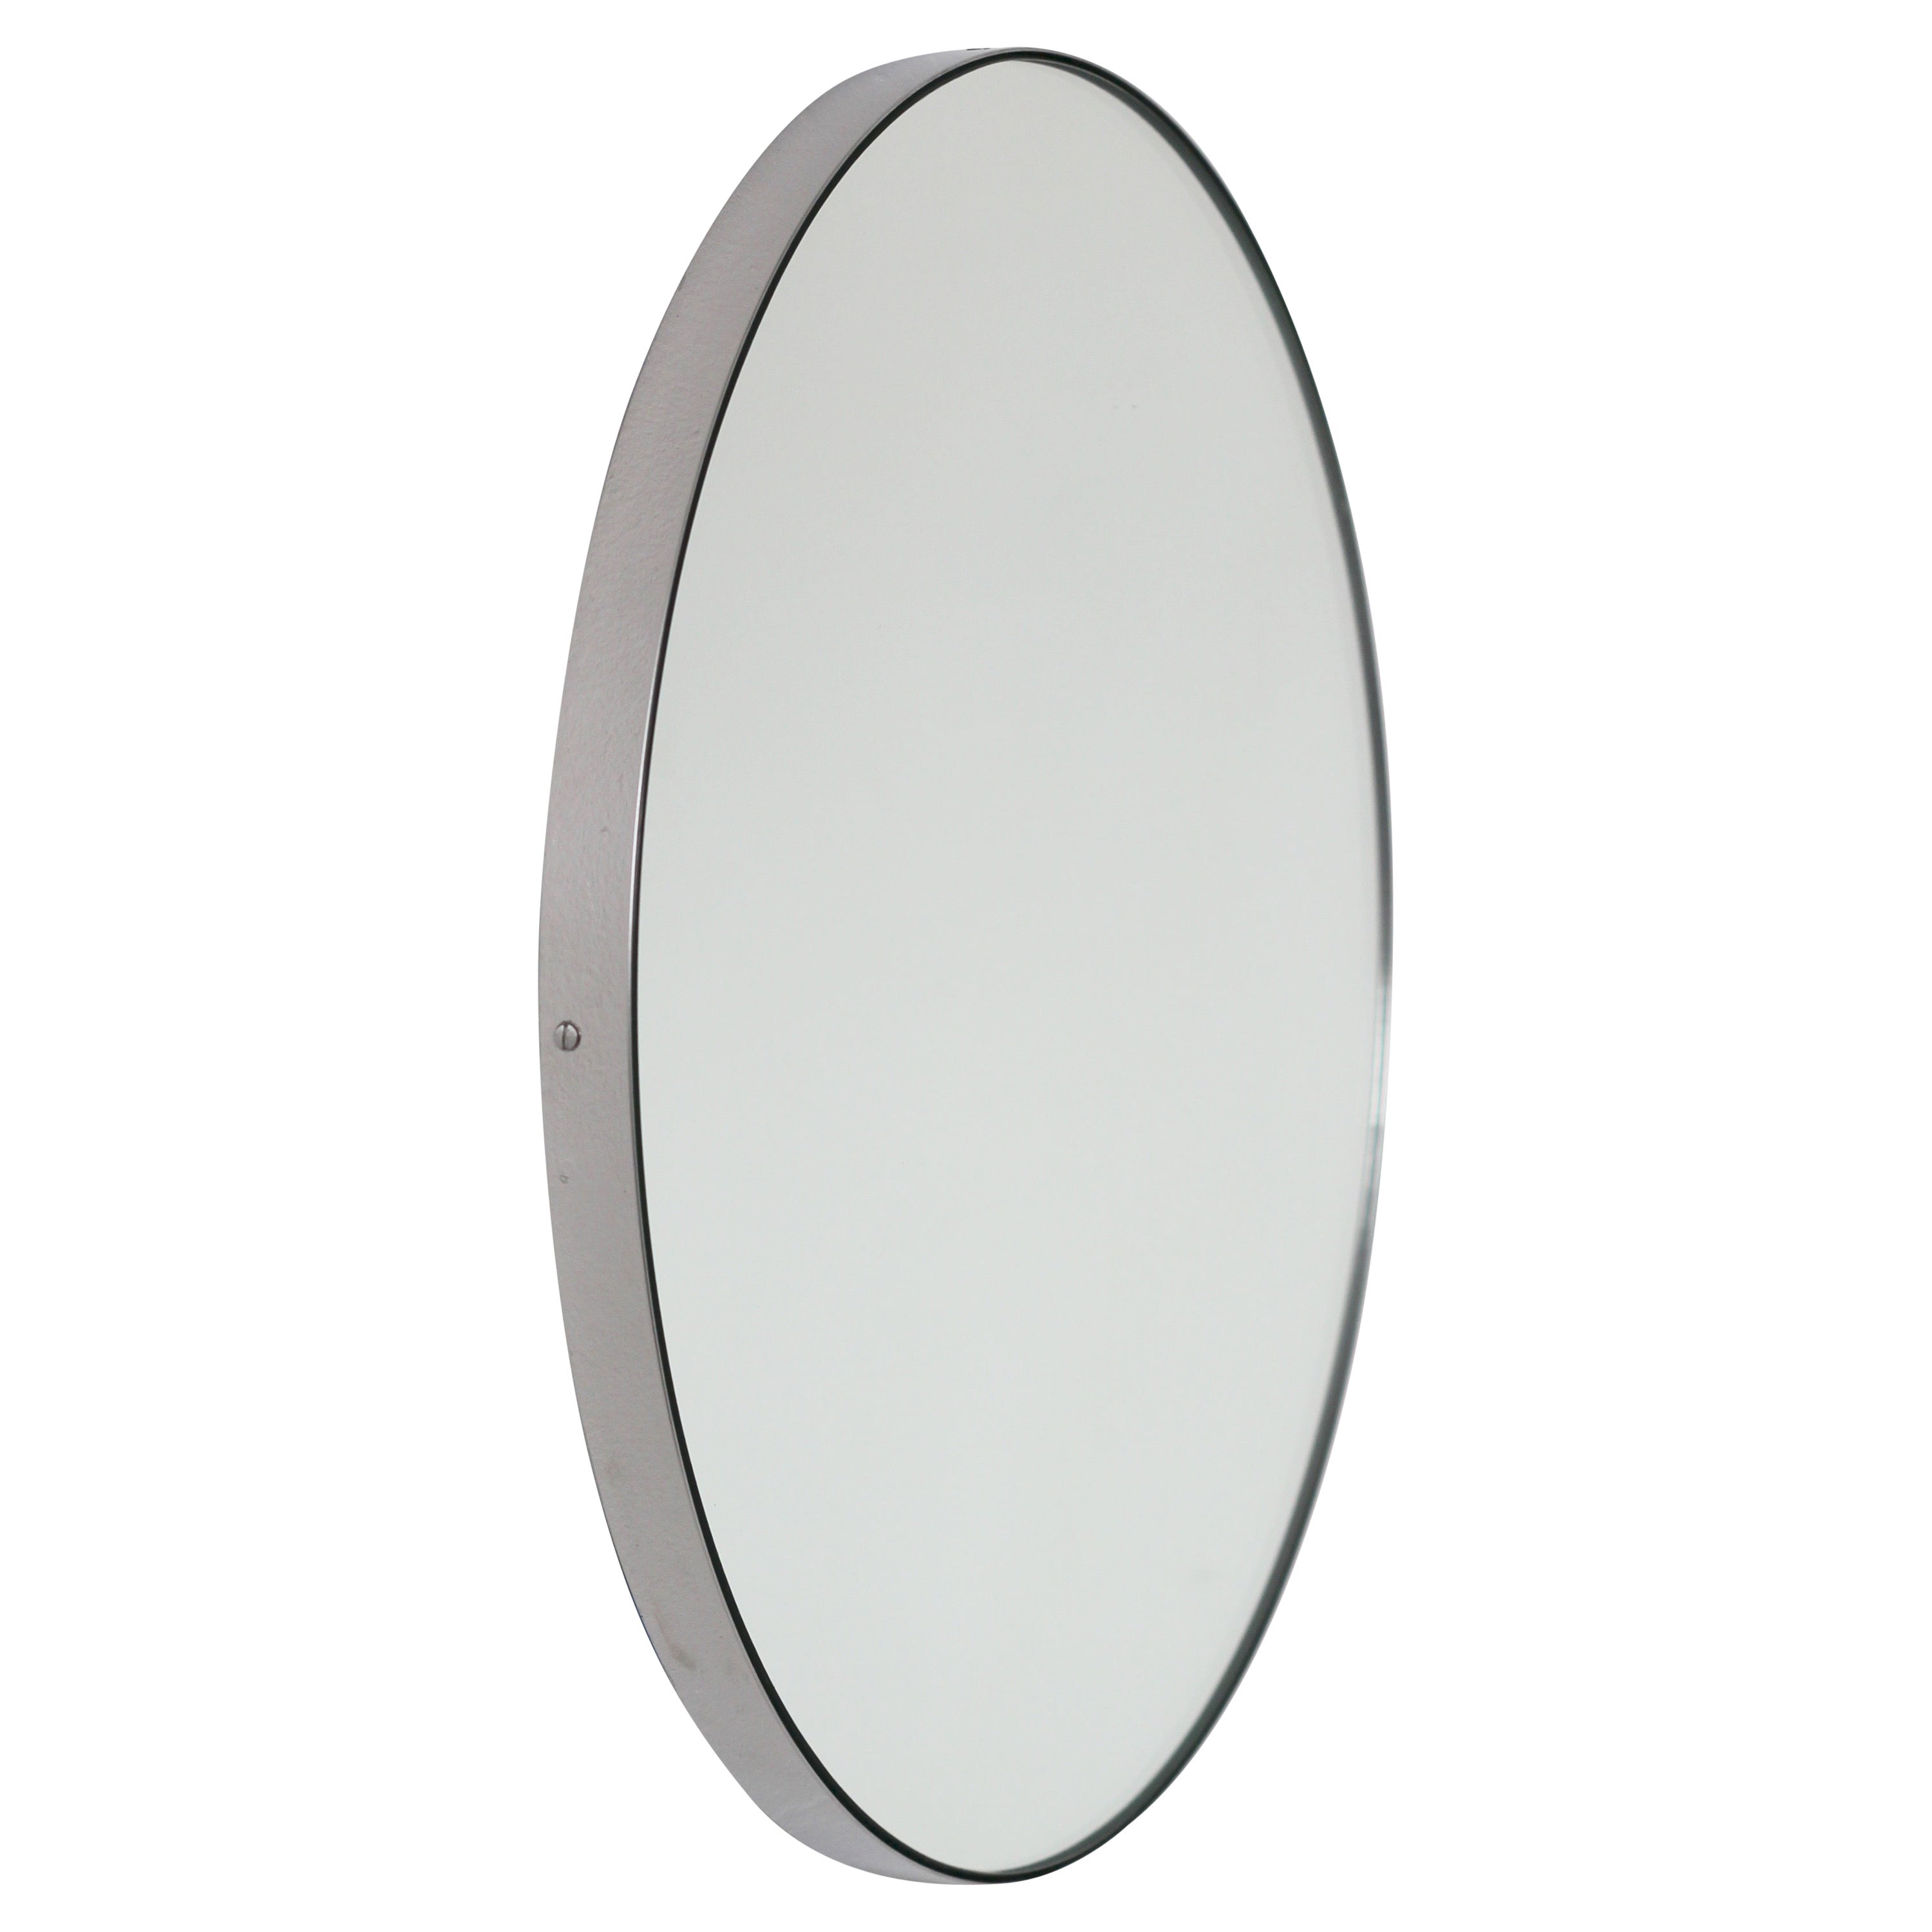 Orbis Round Handcrafted Mirror with Minimalist Stainless Steel Frame, XL For Sale